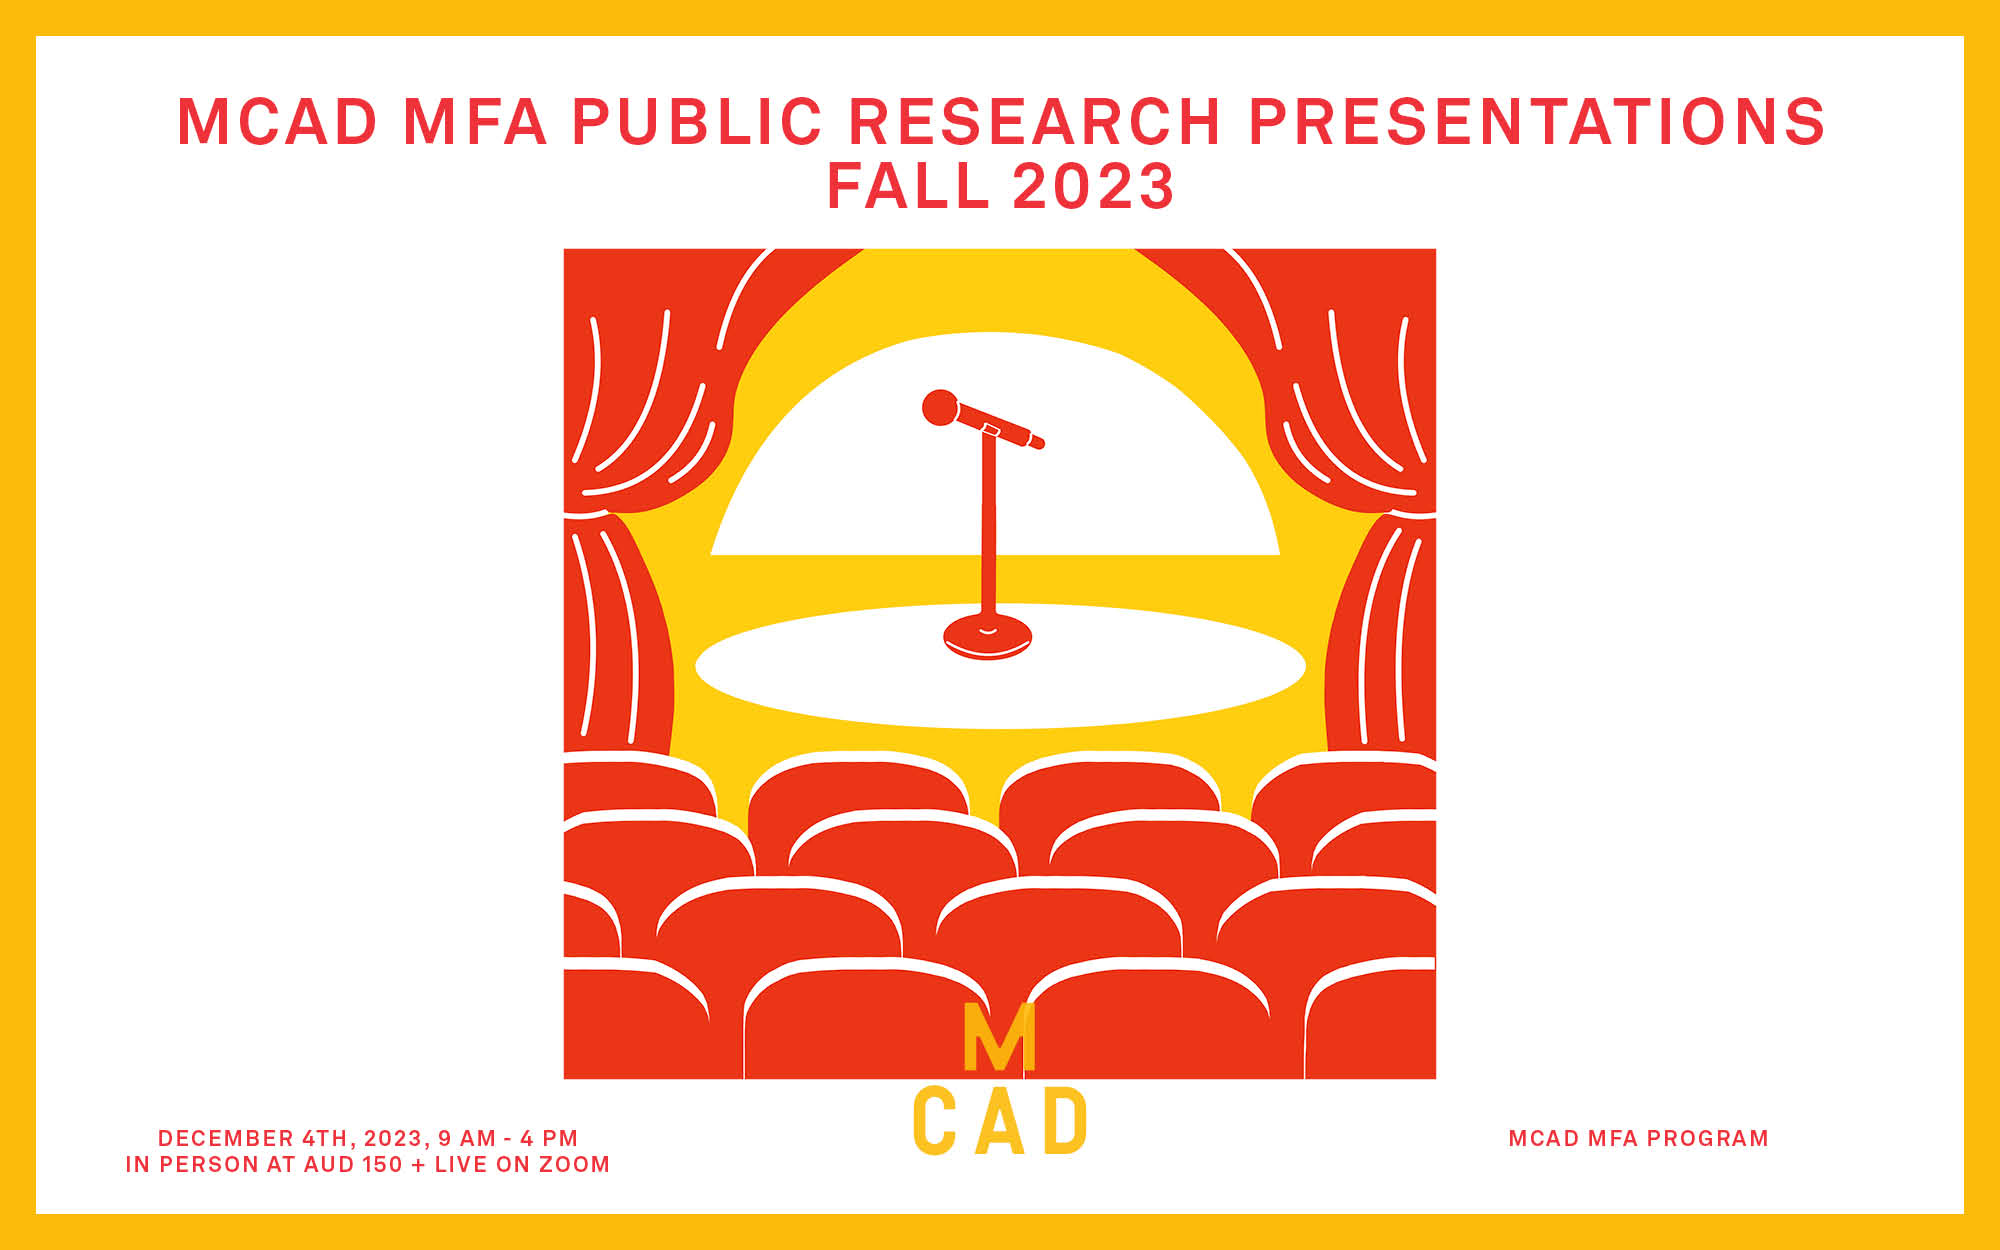 Public Research presentations poster in red and yellow with an image of a microphone on a stage